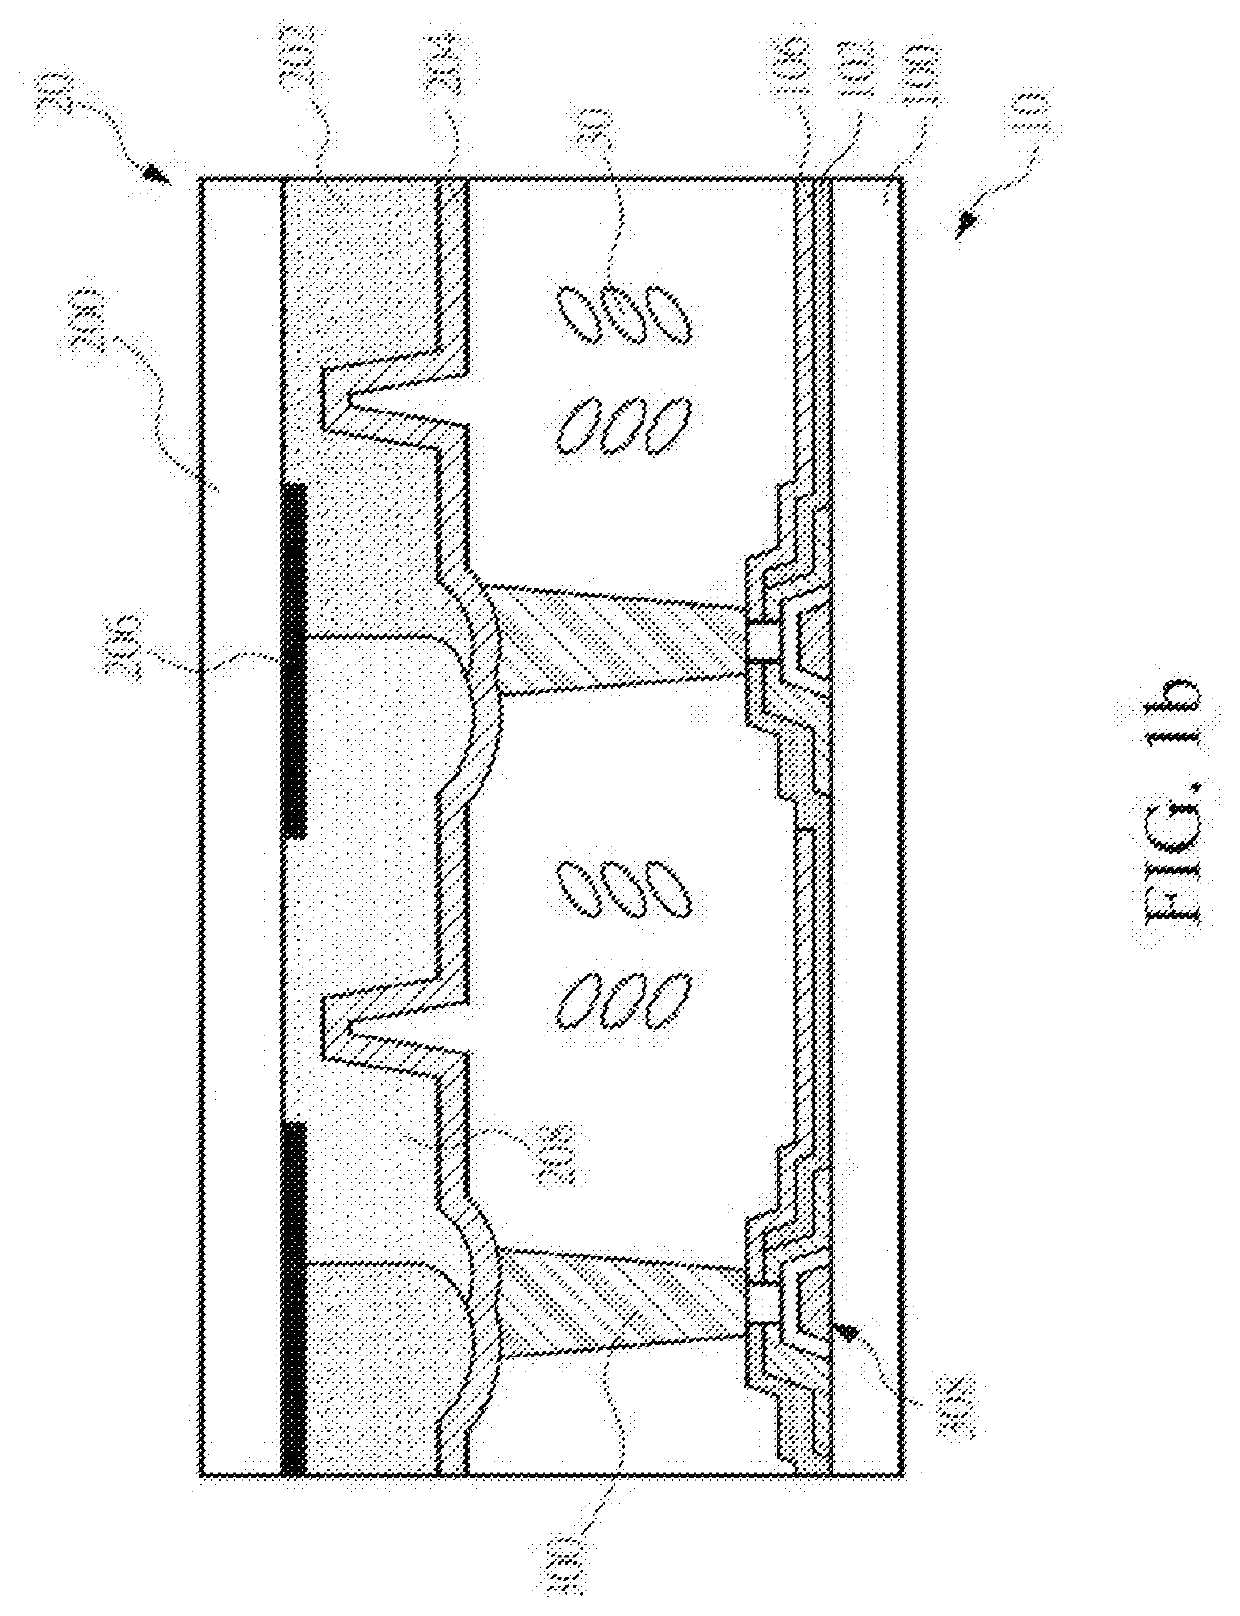 Display panel and method for manufacturing same